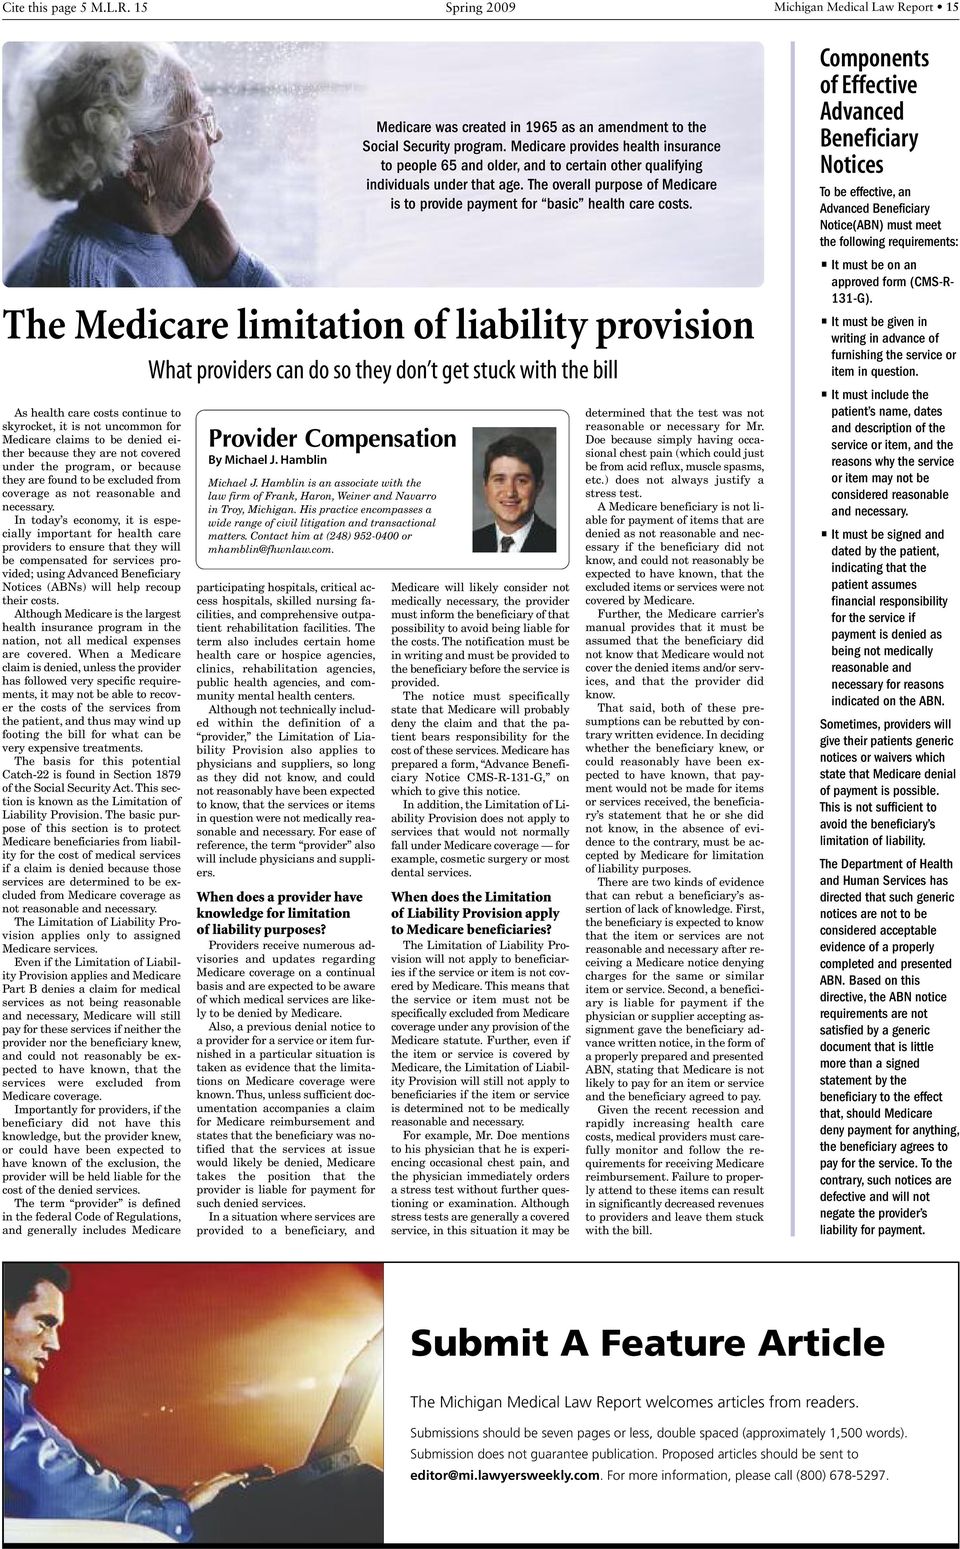 is not uncommon for Medicare claims to be denied either because they are not covered under the program, or because they are found to be excluded from coverage as not reasonable and necessary.